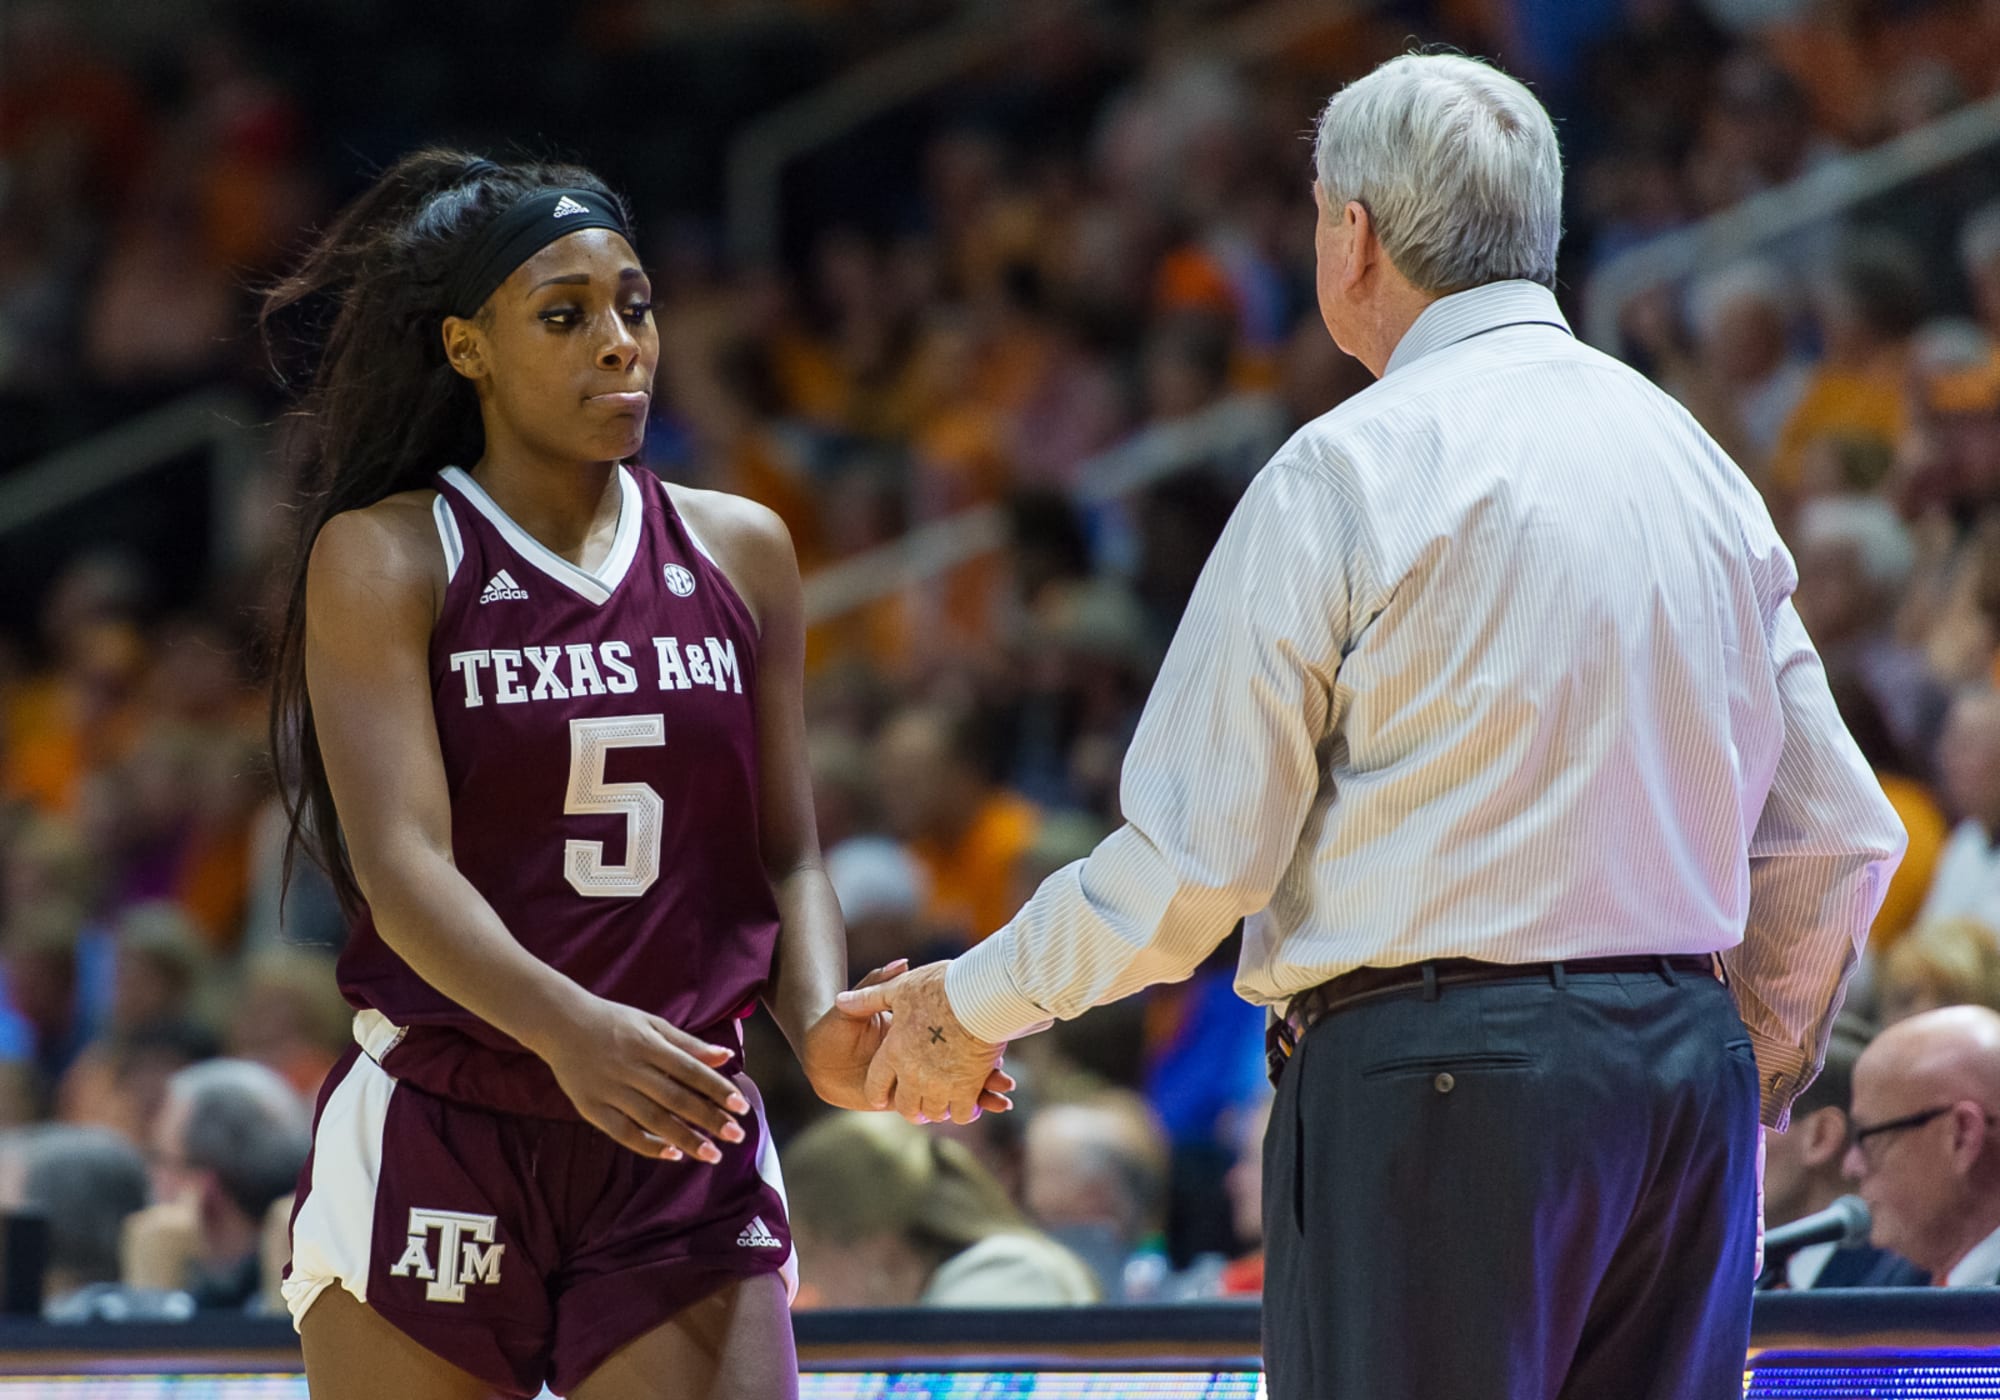 Anriel Howard Transfers From Texas Aandm To Mississippi State